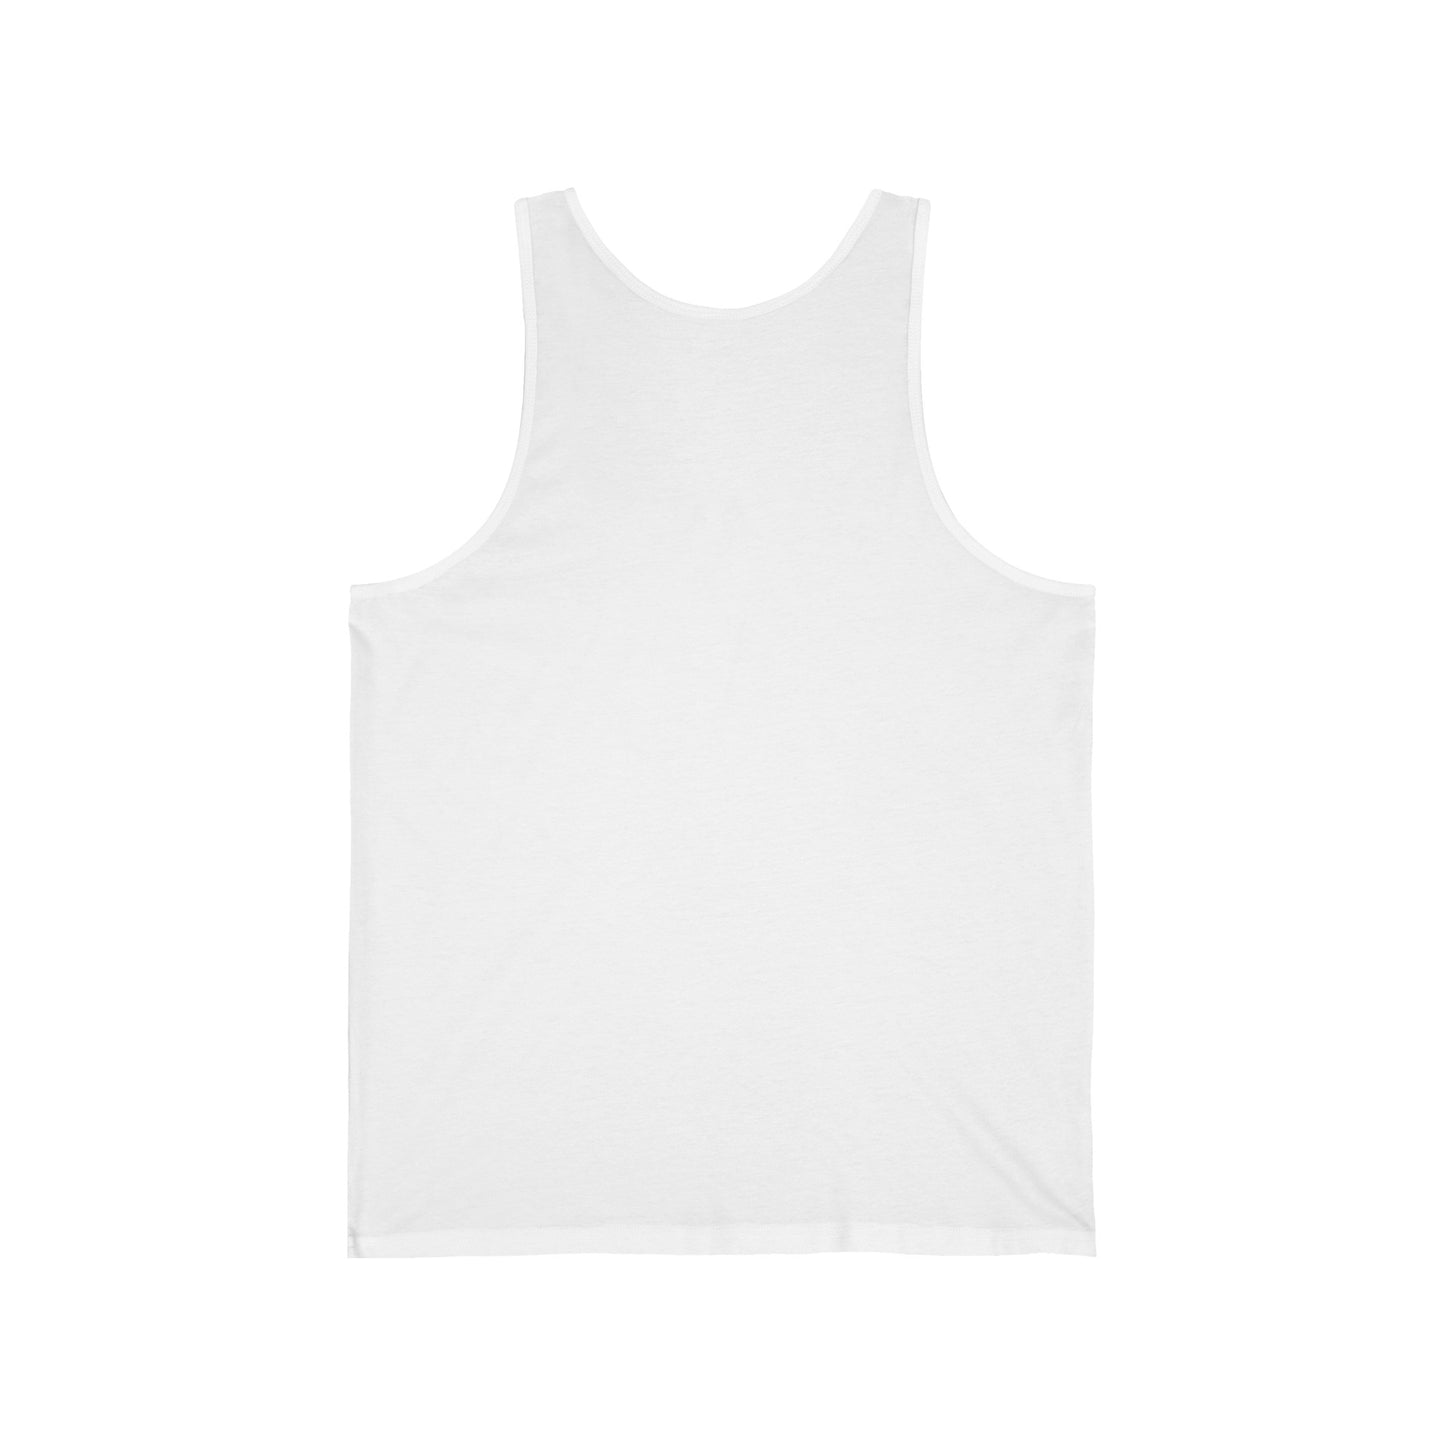 Made in the 80's Unisex Jersey Tank